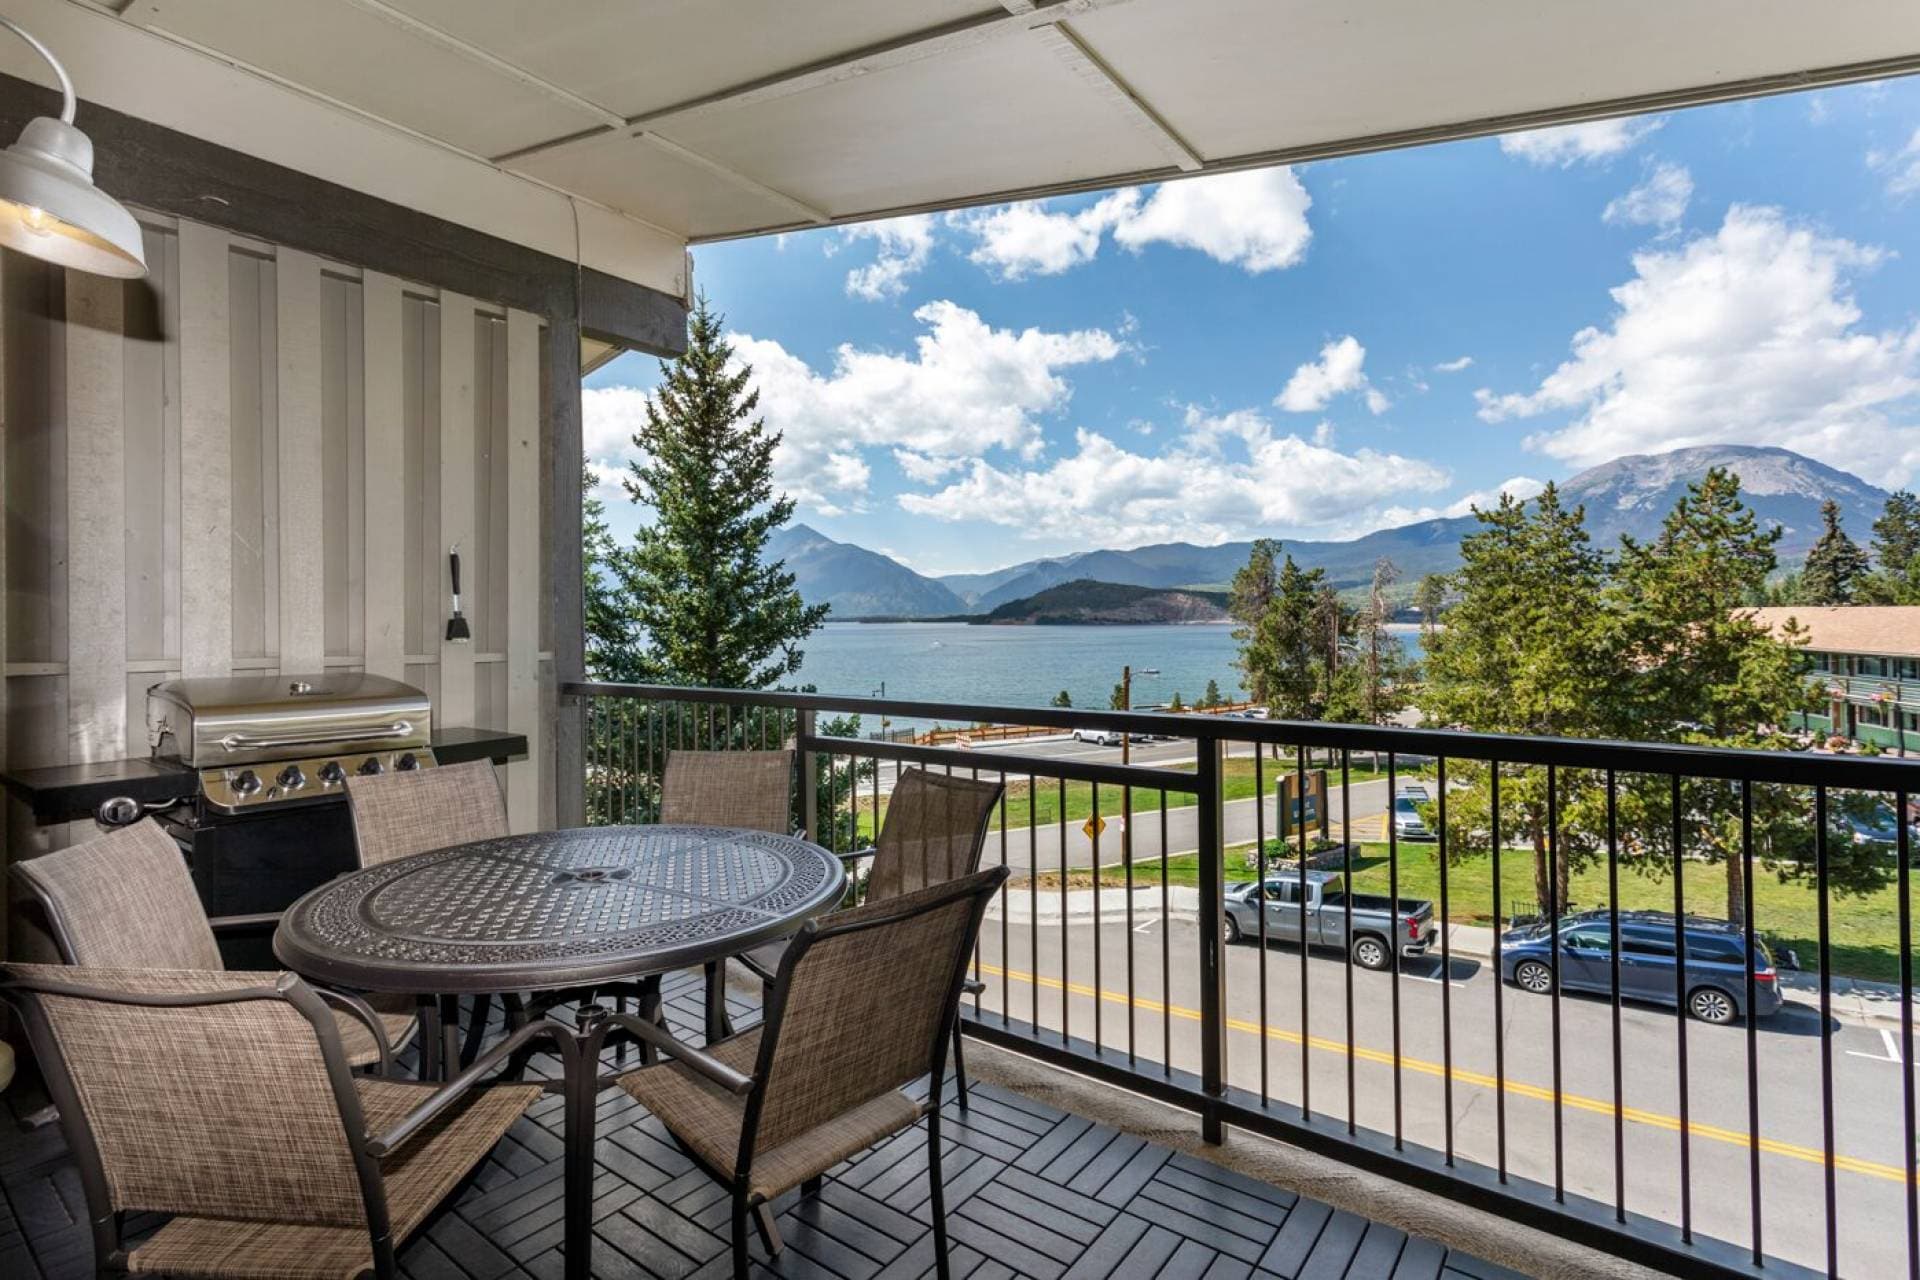 Property Image 1 - Soak Up Music From the Amphitheater and Enjoy Lake and Mountain Views. Central to Major Ski Resorts.